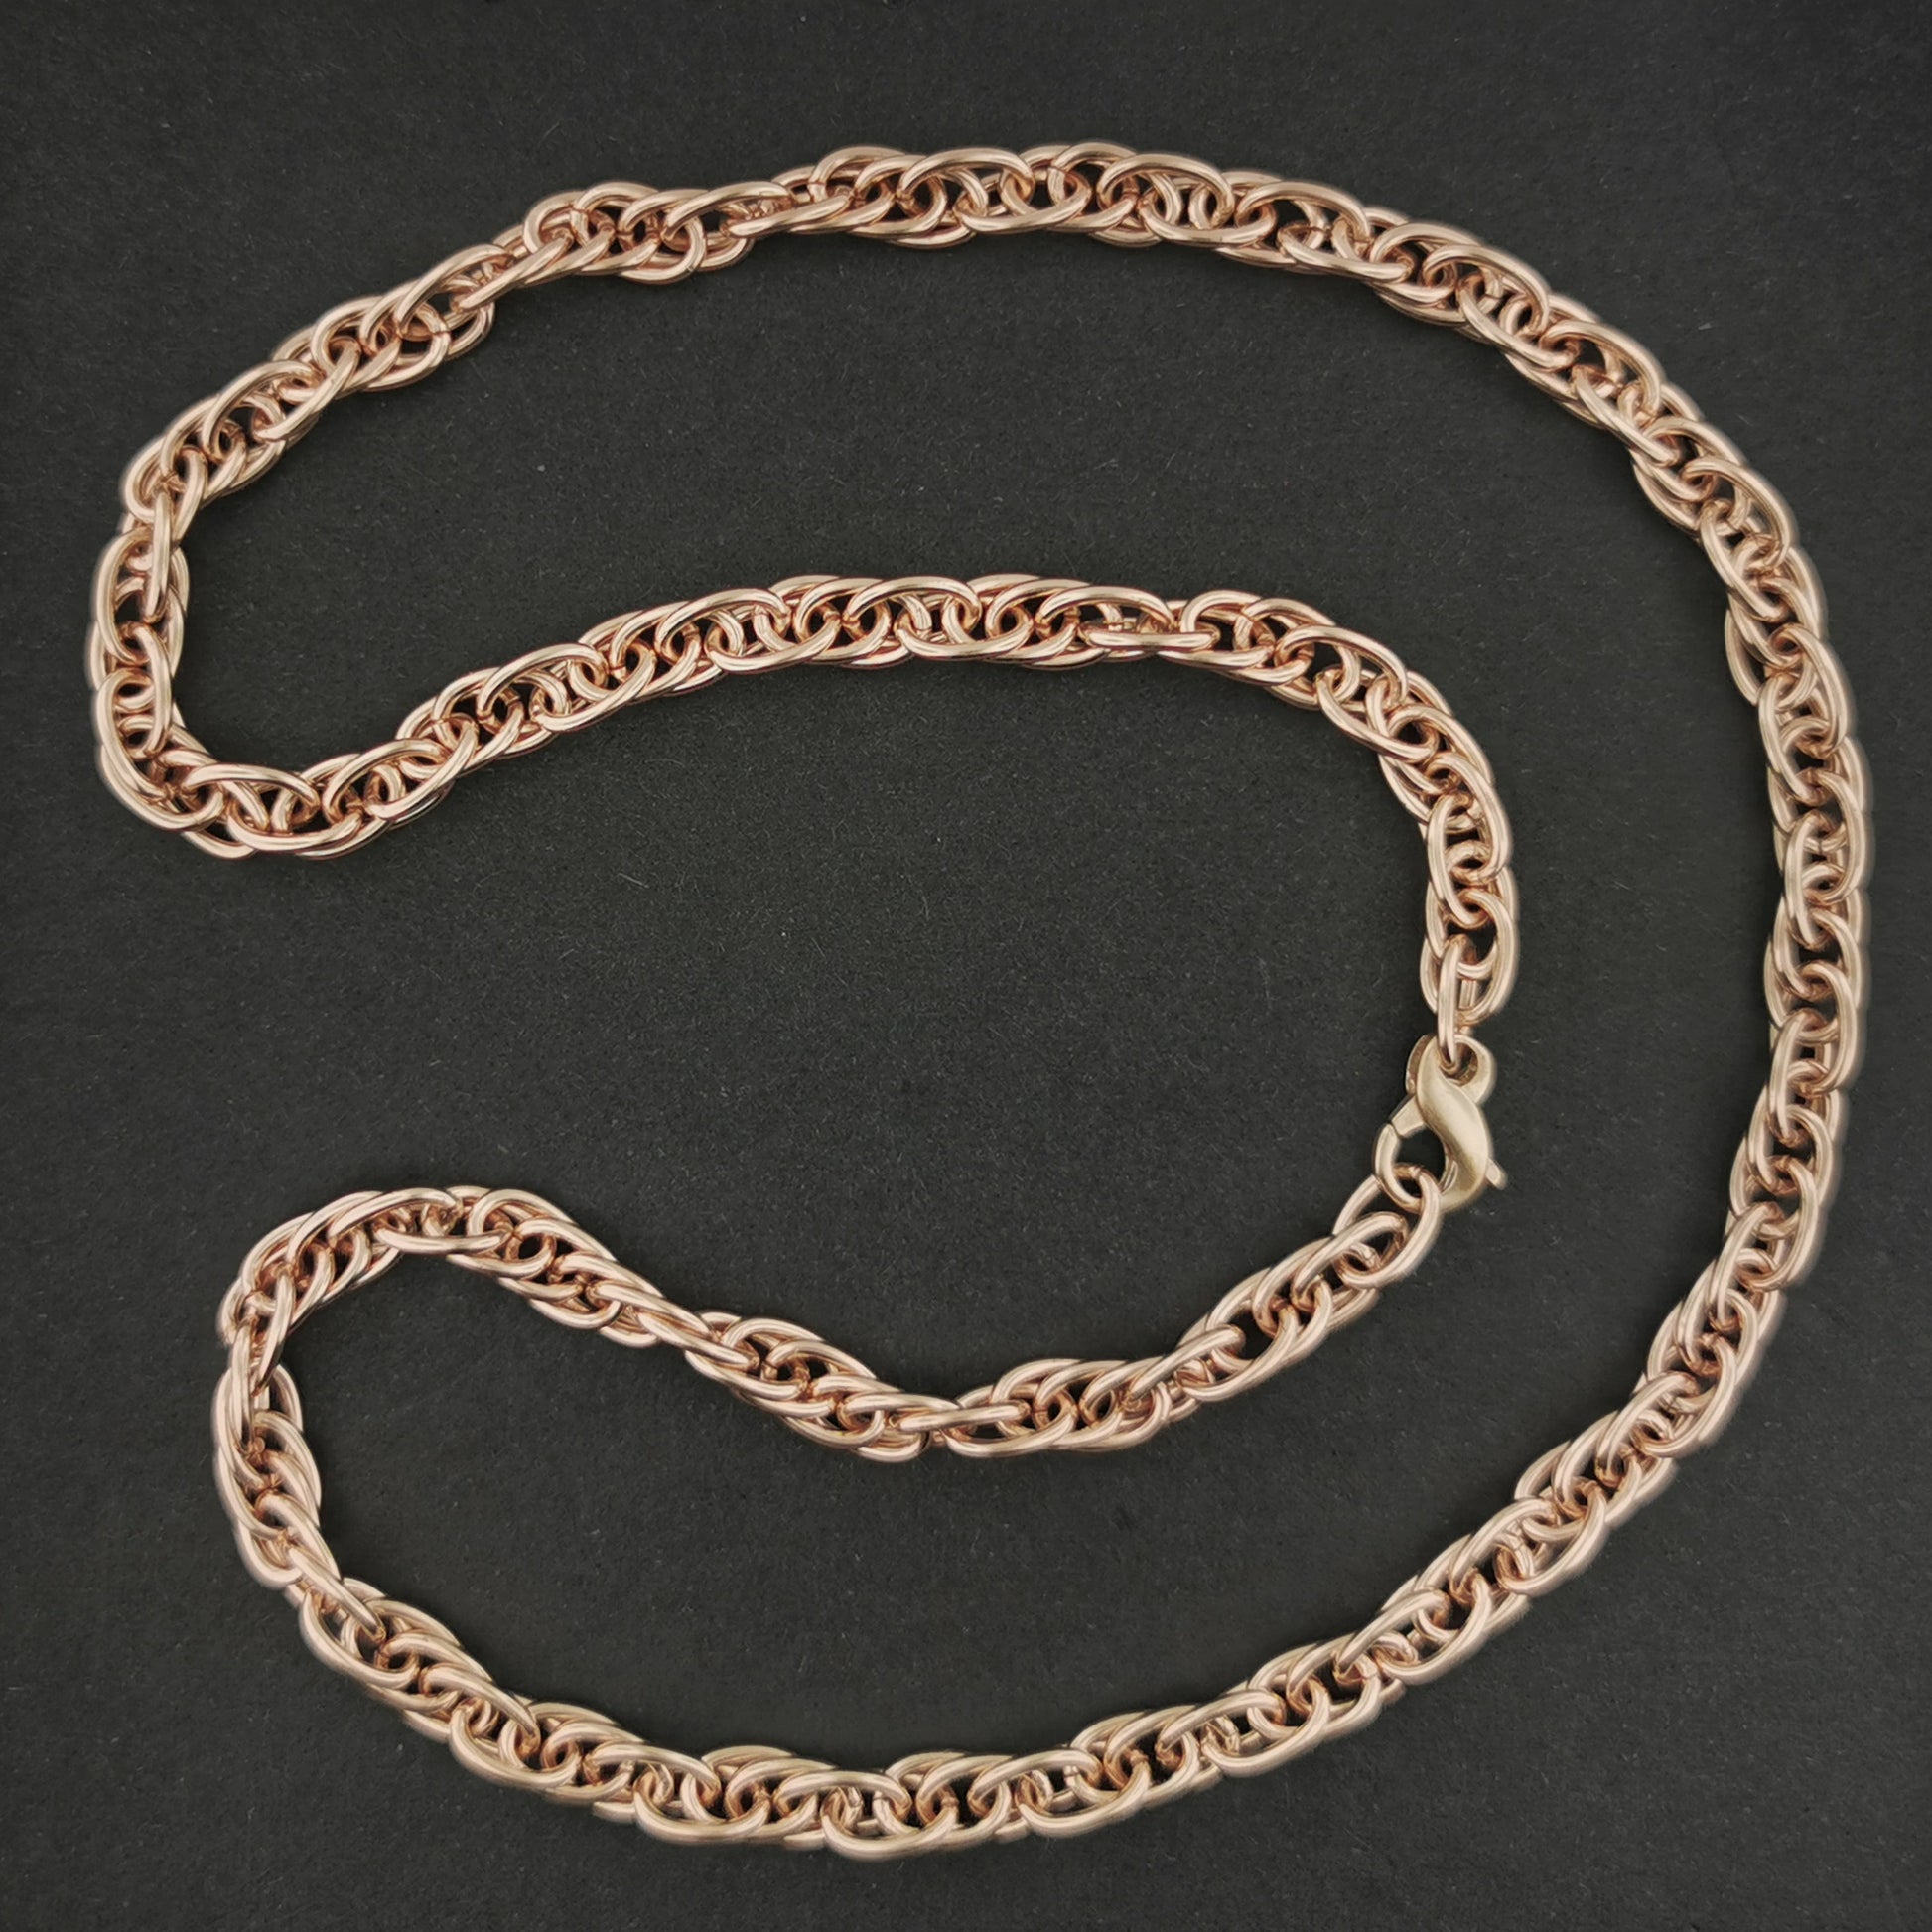 Large Antique Bronze 5.6mm Rope Chain made to order, bronze rope chain, bronze chain, rope chain, necklace chain, bronze necklace chain, 5.6mm chain, 5.6mm bronze chain, bronze chain jewelry, bronze chain jewellery, chain jewelry chain jewellery, bronze jewellery, bronze jewelry, 5.6mm chain necklace, 5.6mm bronze chain necklace